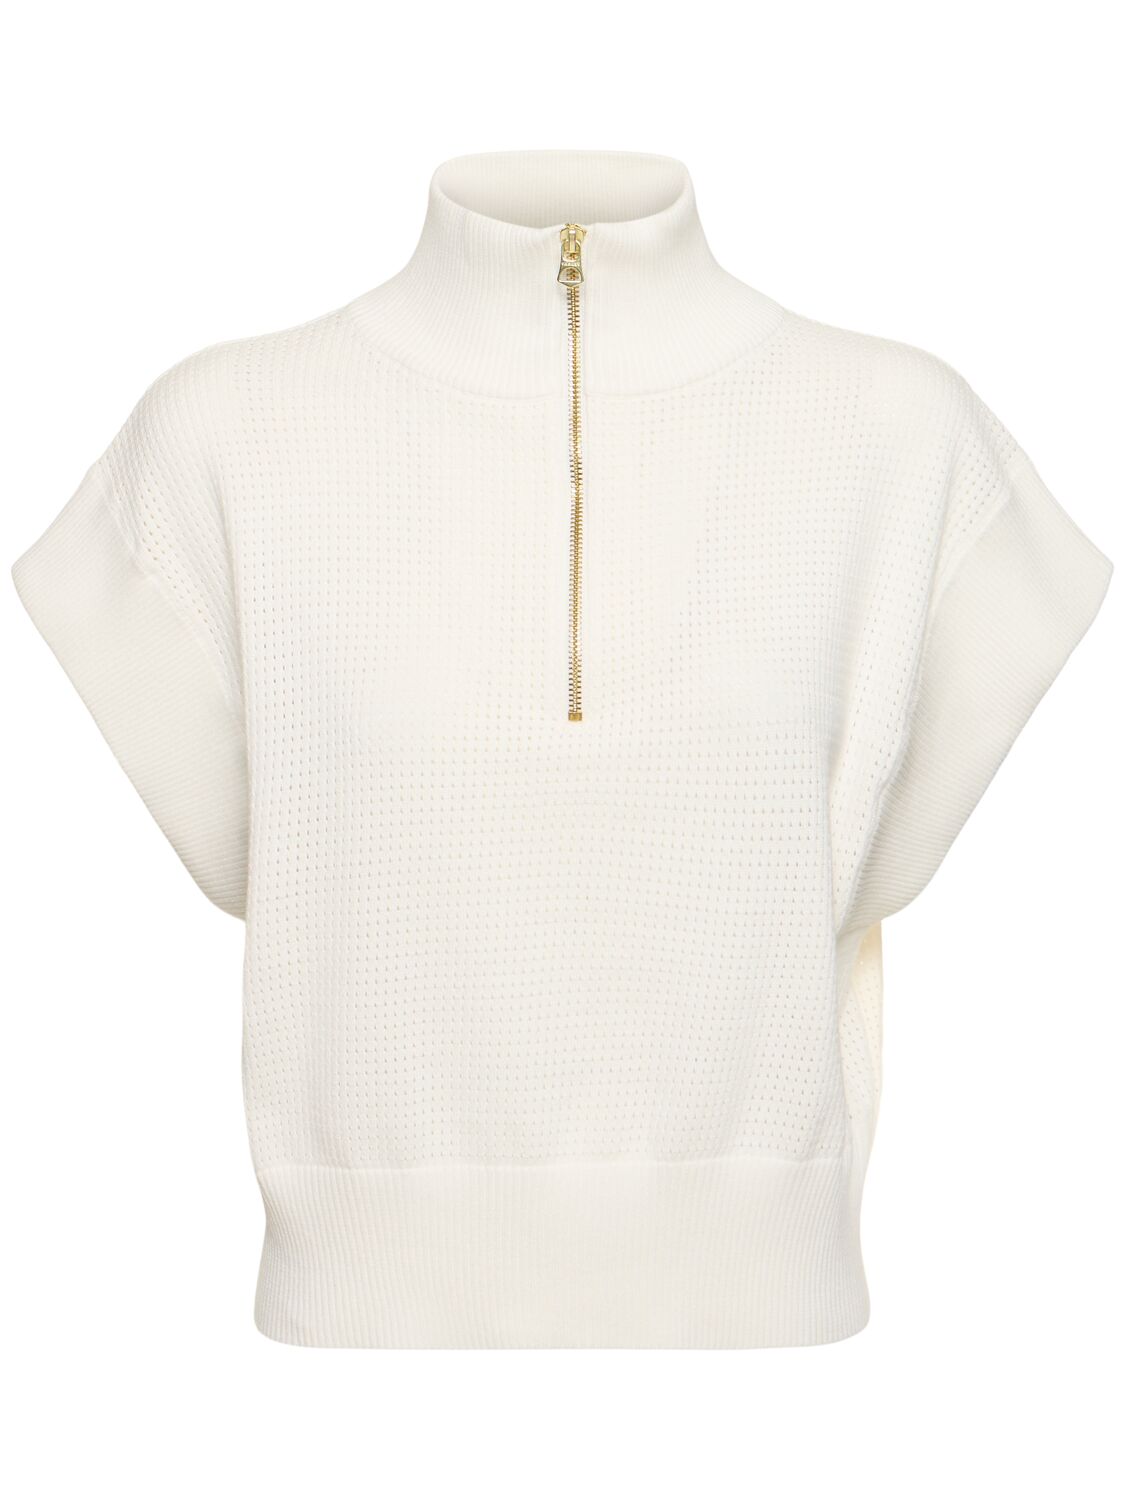 Varley Fulton Cropped Knit Top In Snow White